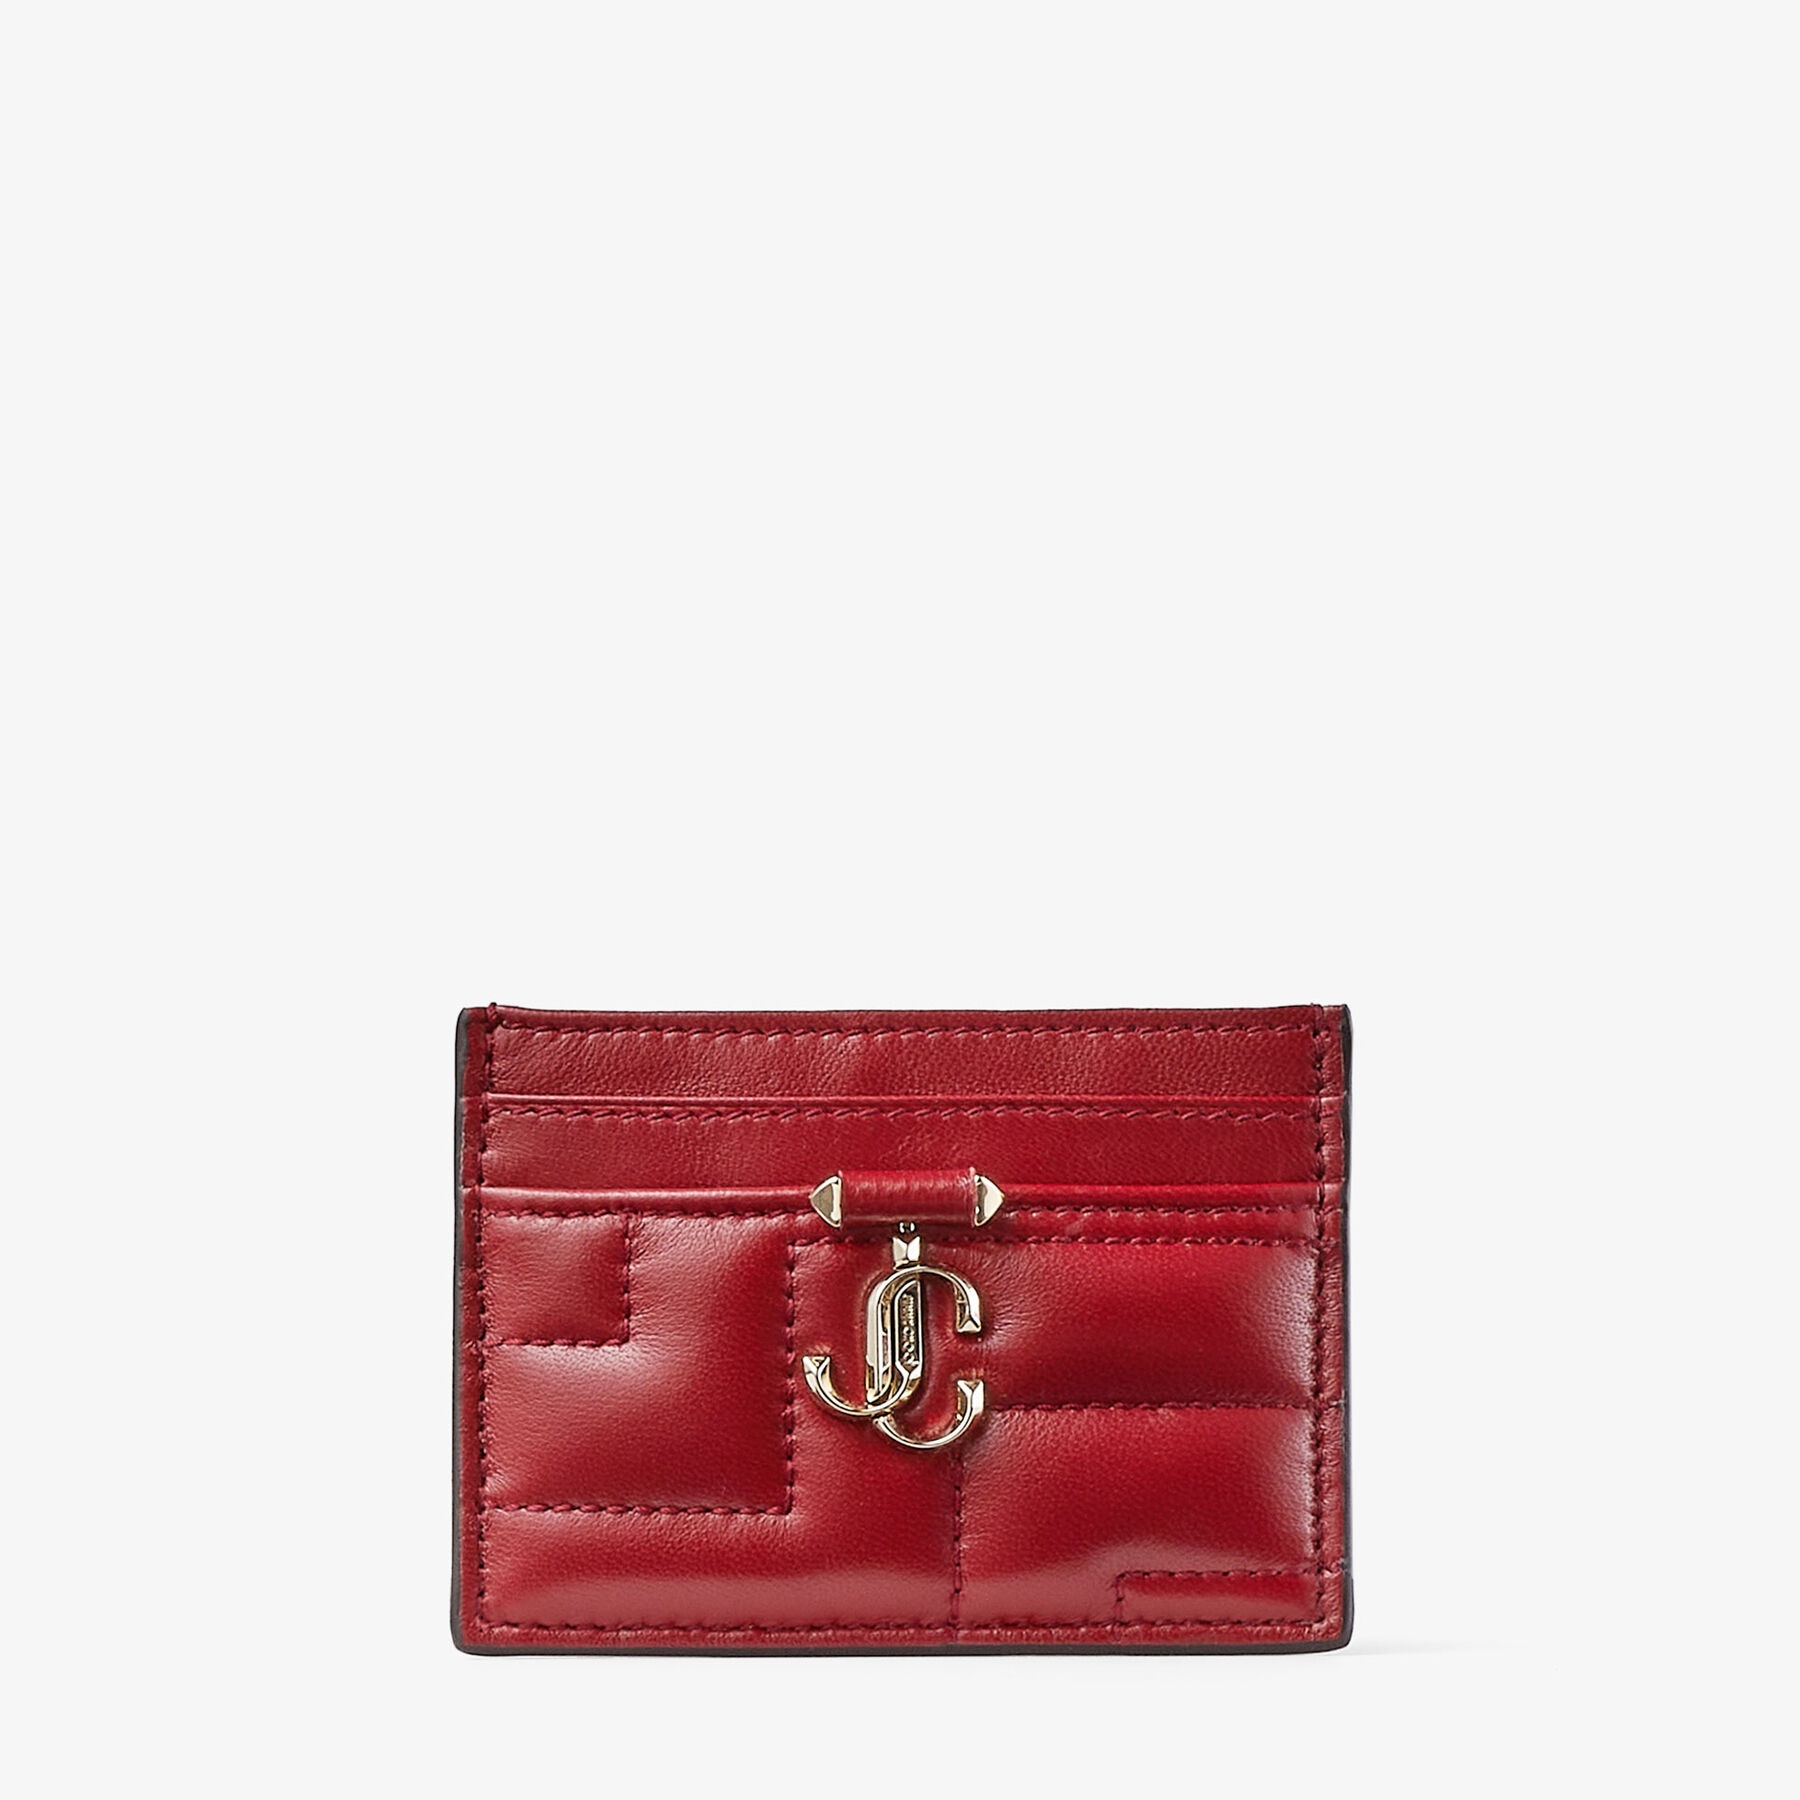 Umika
Cranberry Quilted Nappa Leather Card Holder with JC Emblem - 1